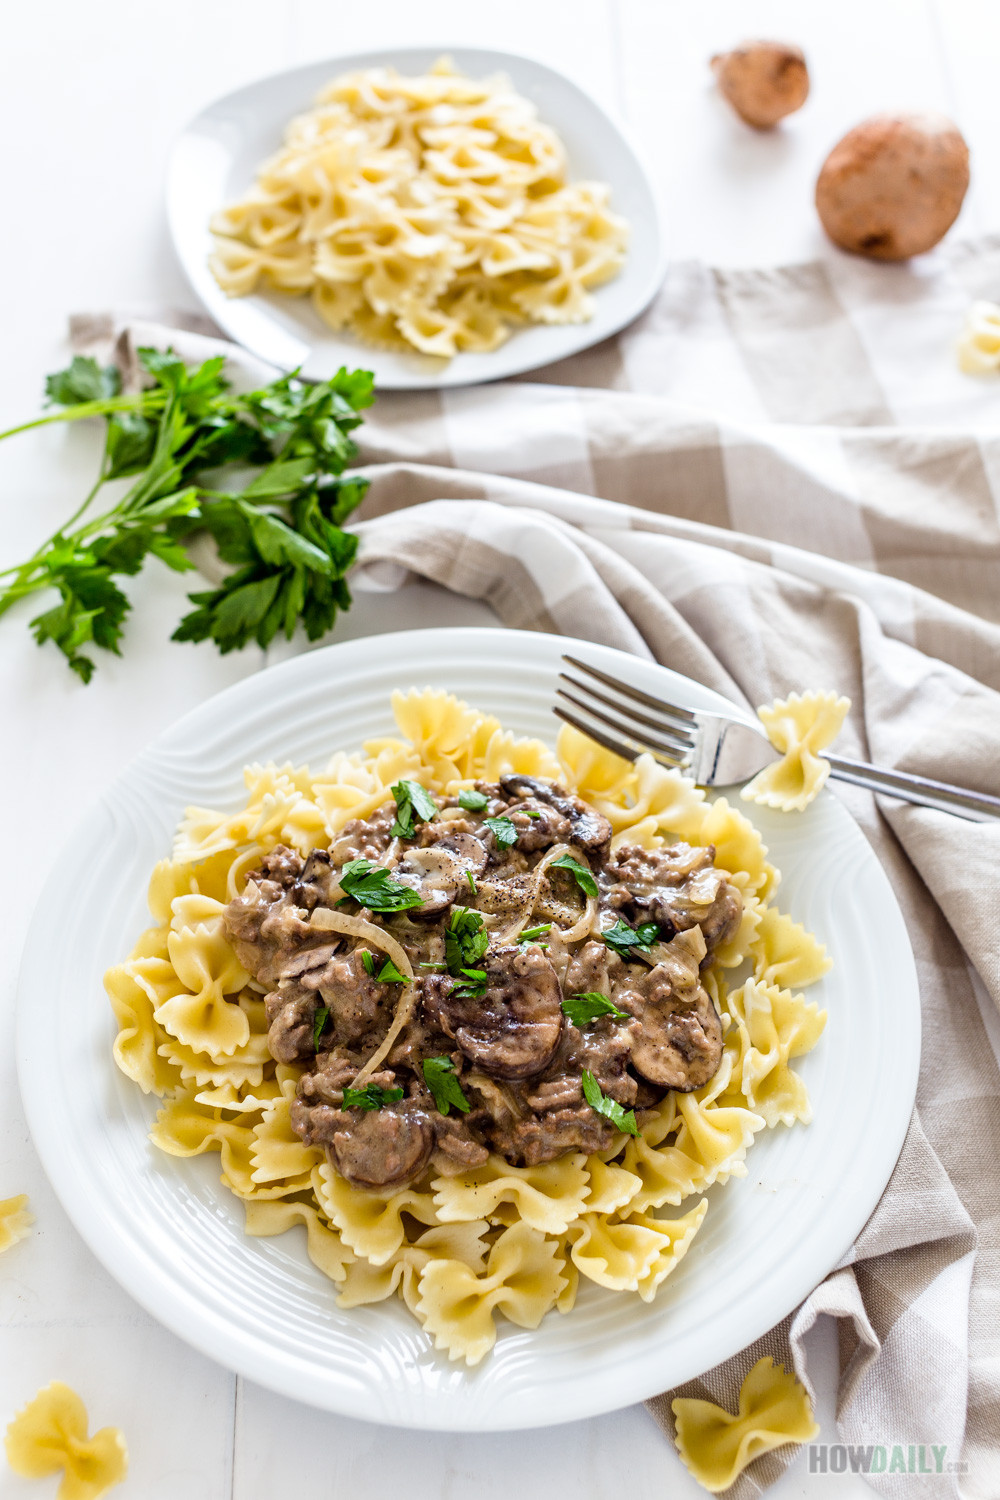 Top 21 Beef Stroganoff with sour Cream - Best Recipes Ideas and Collections